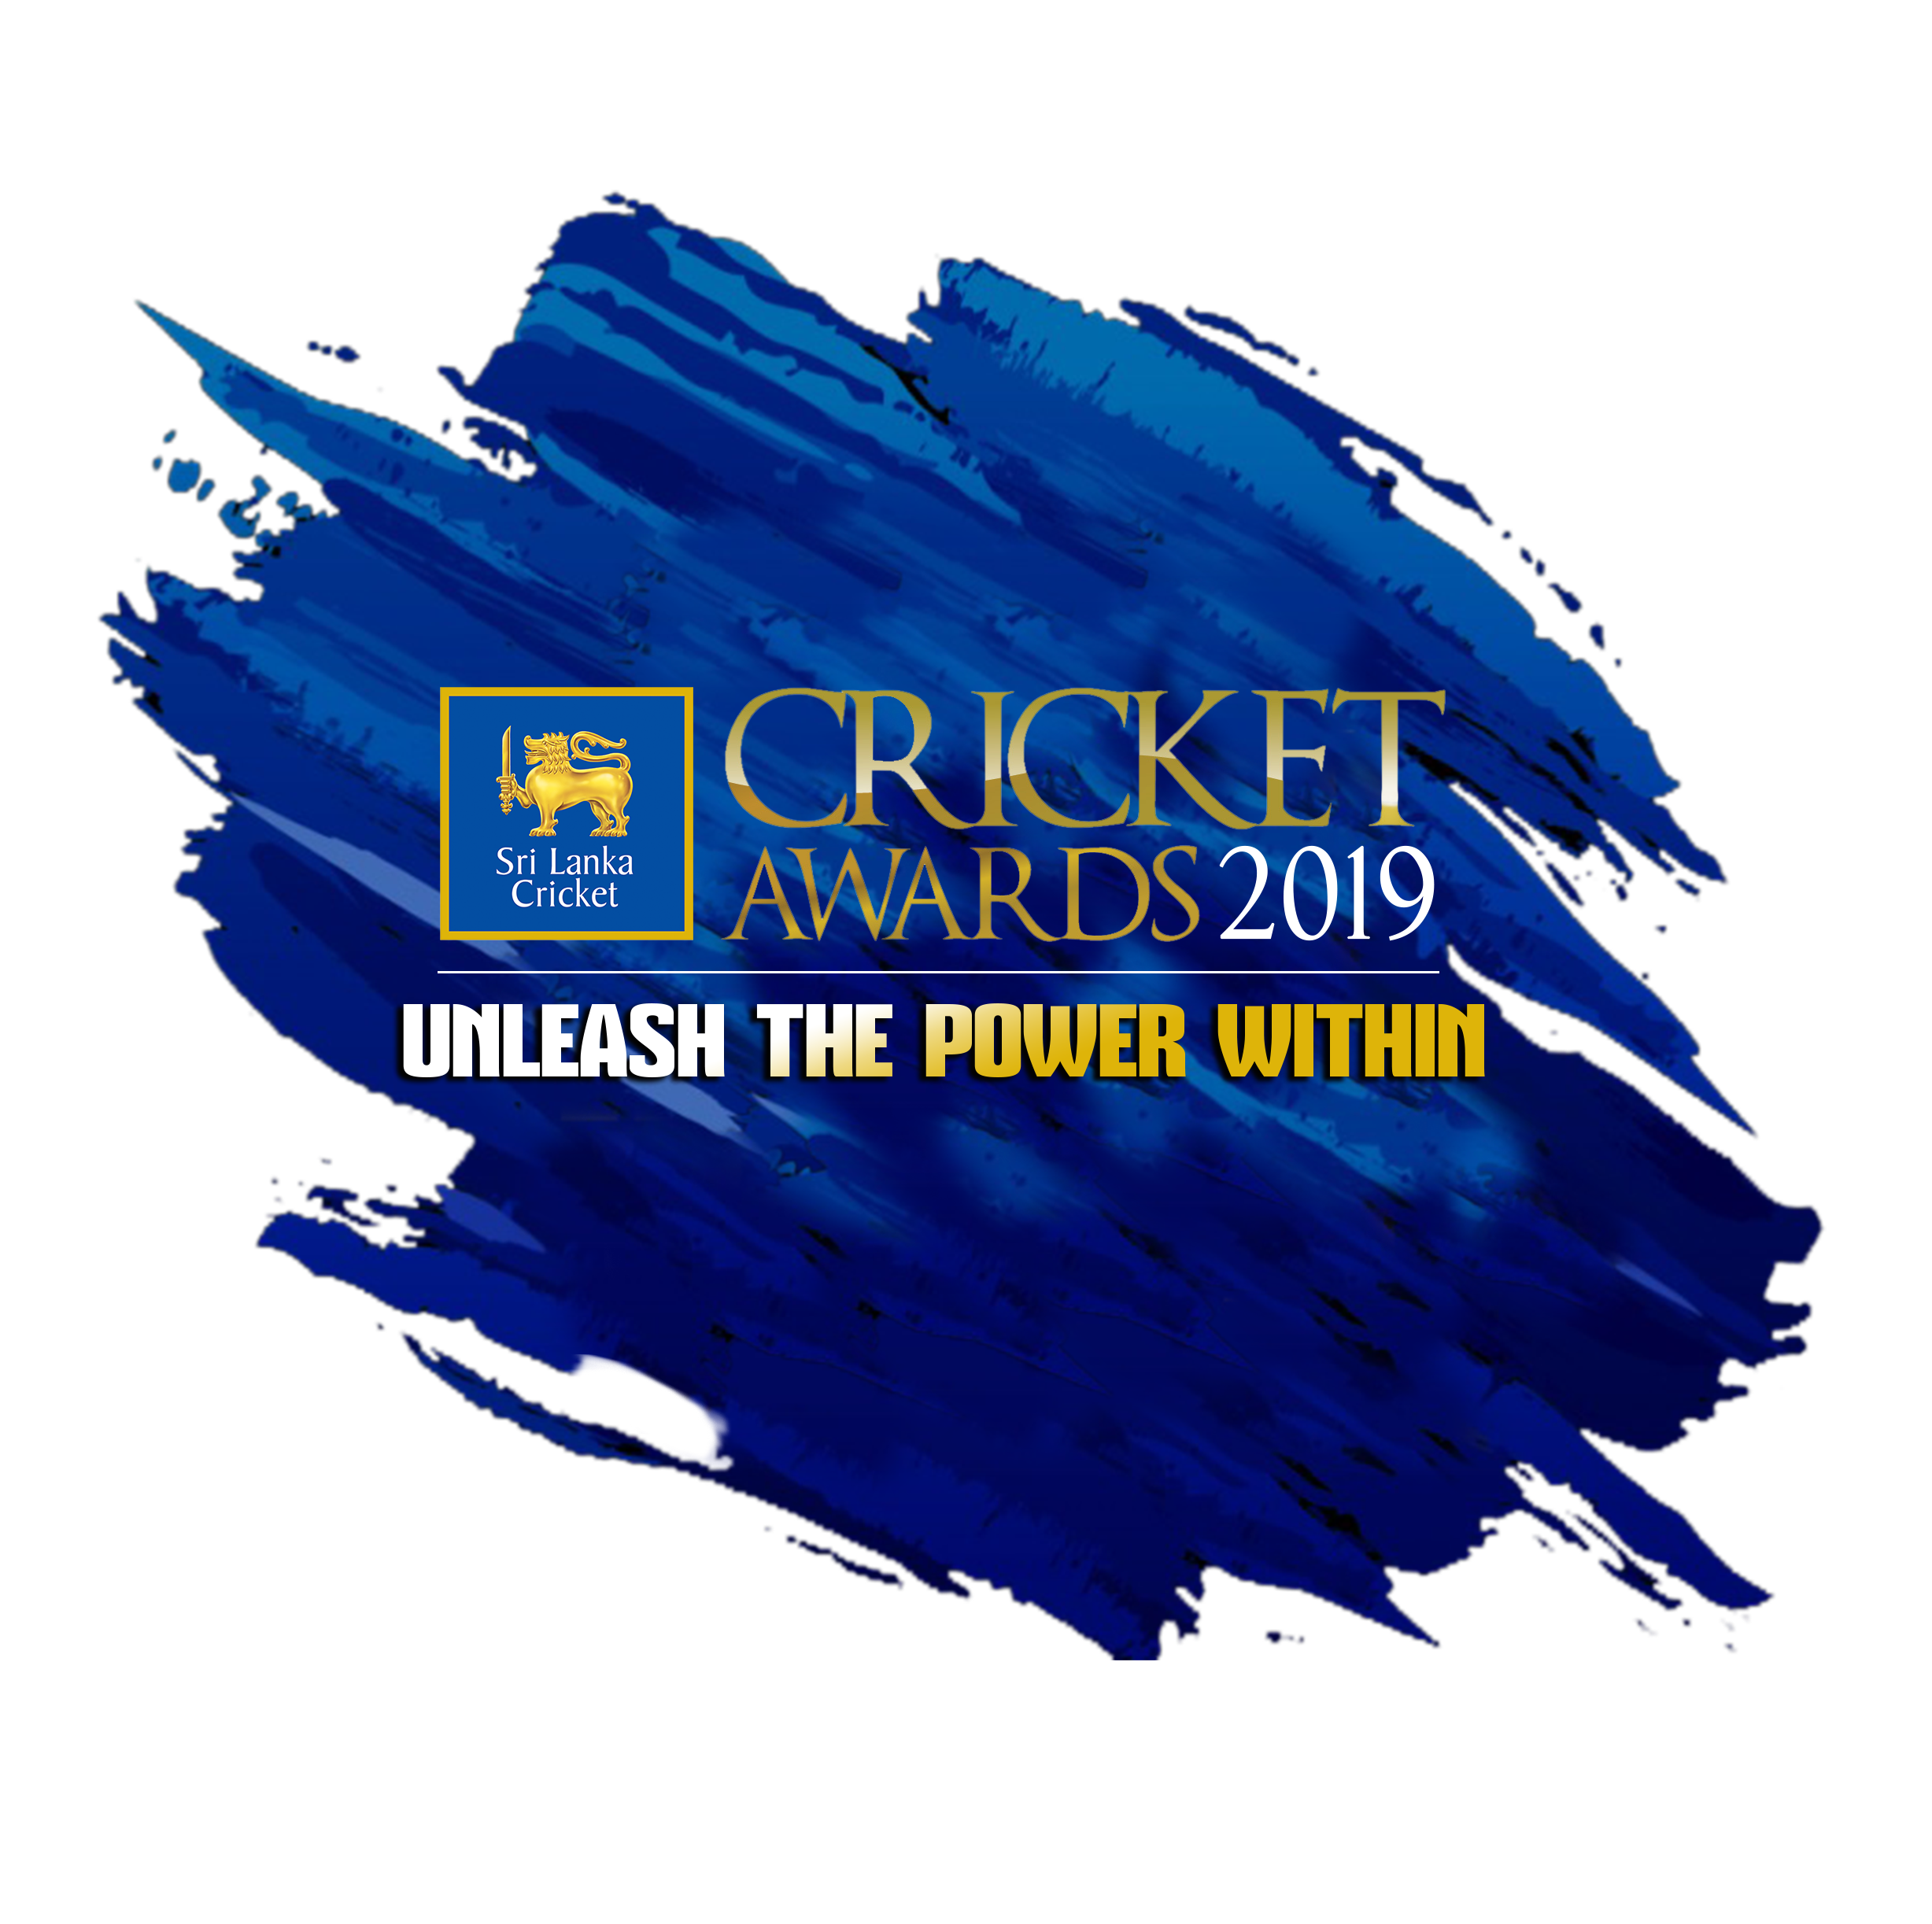 Sri Lanka Cricket Awards 2019 to recognize and reward ‘Cricketing Excellence’ of the year